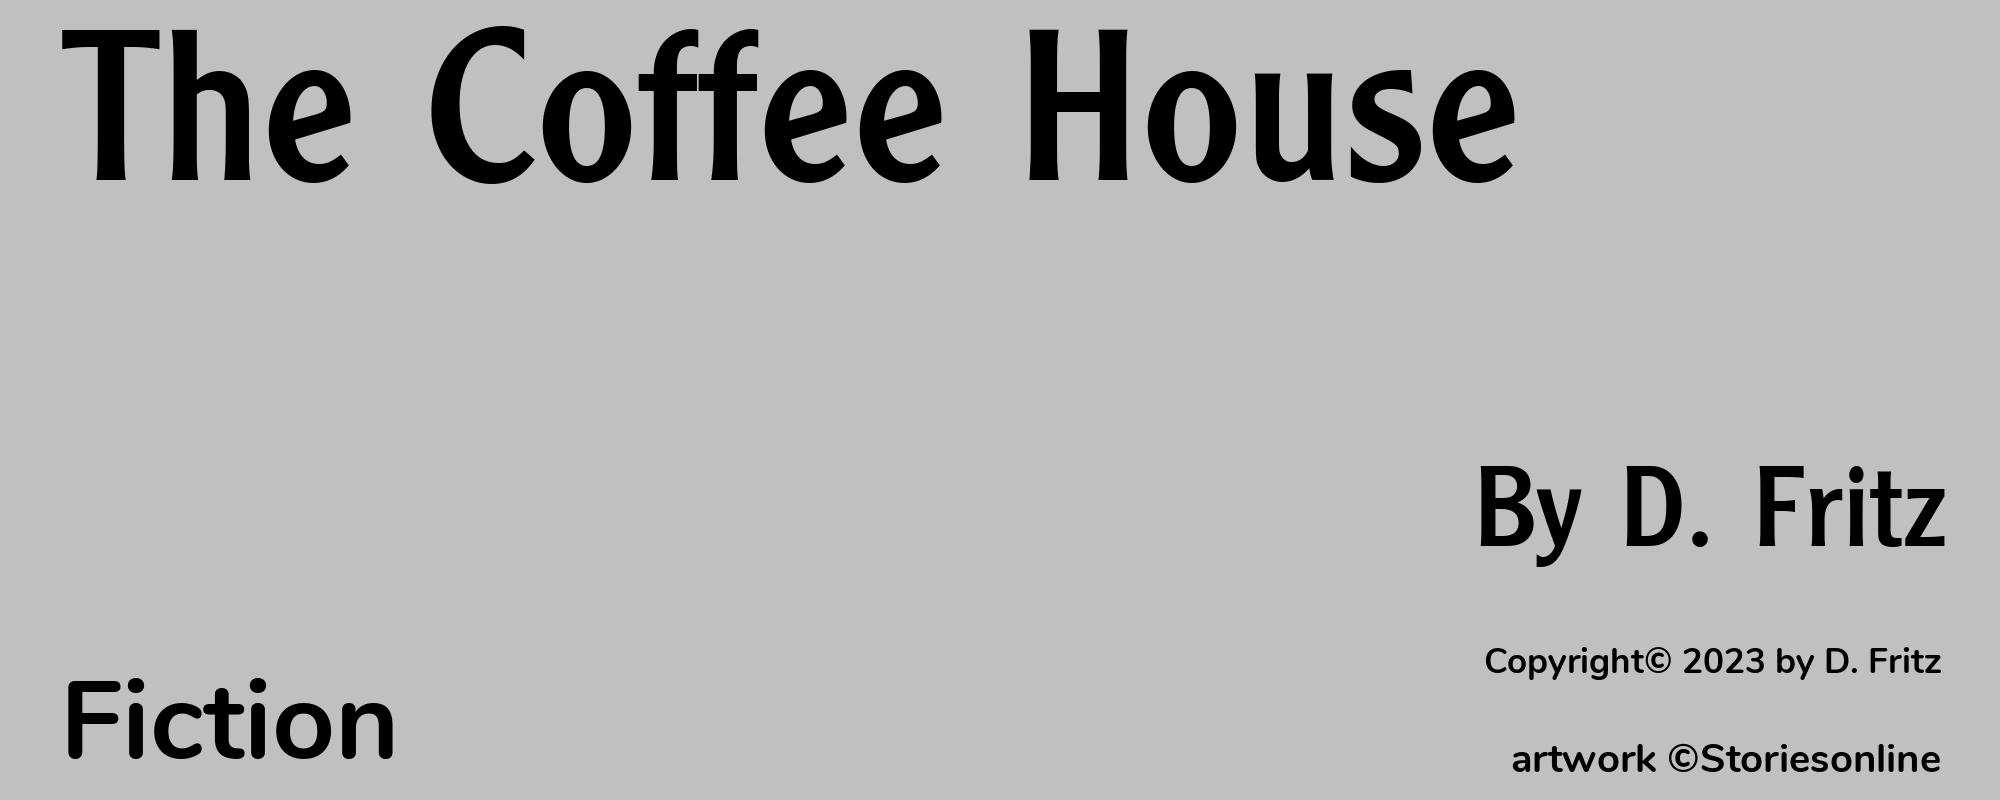 The Coffee House - Cover